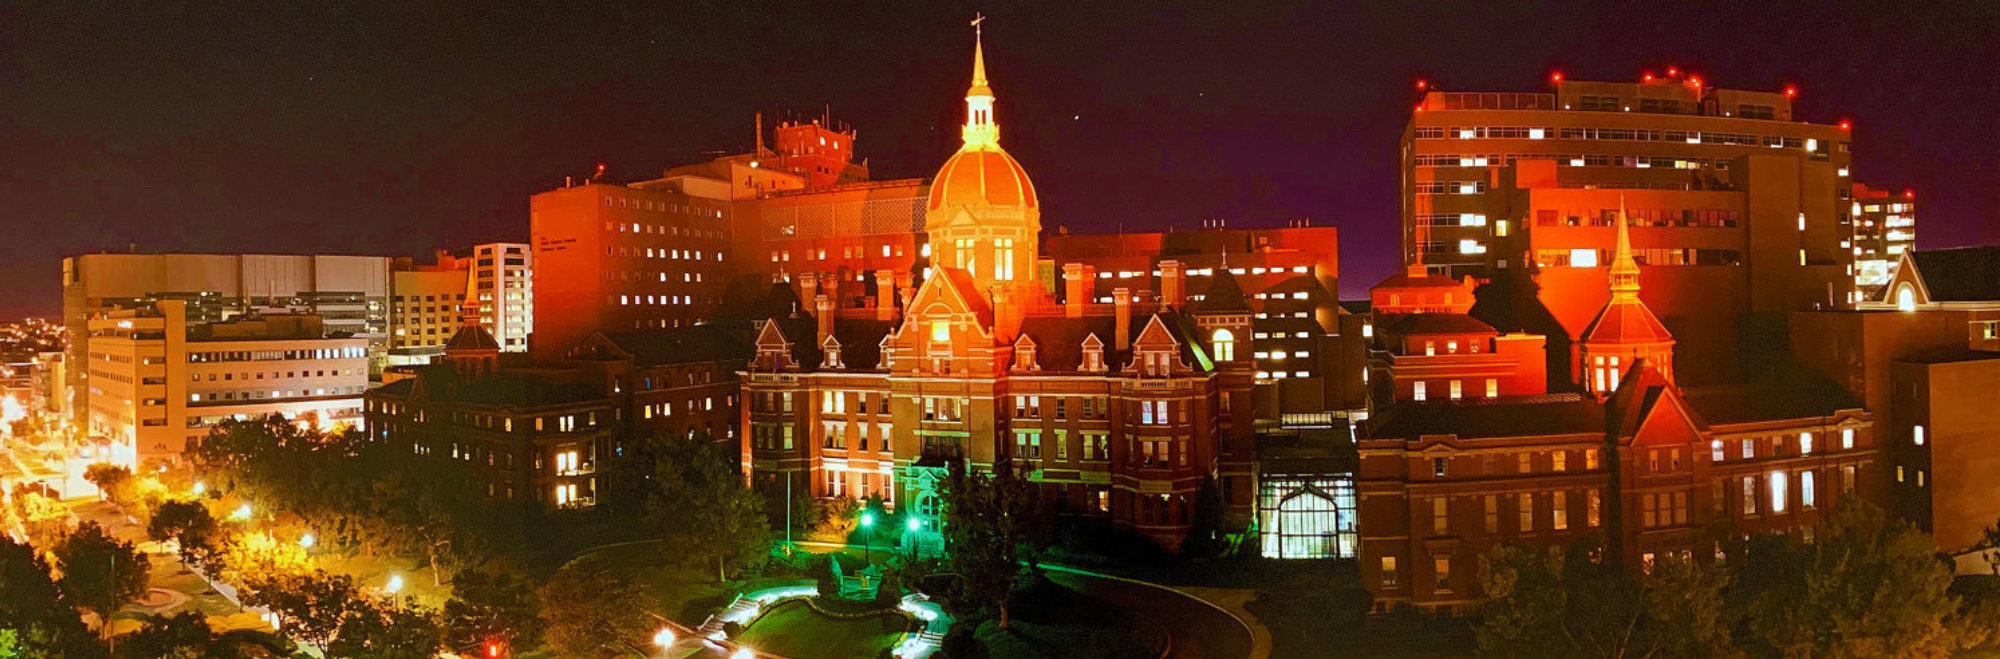 Johns Hopkins Dome aerial view night